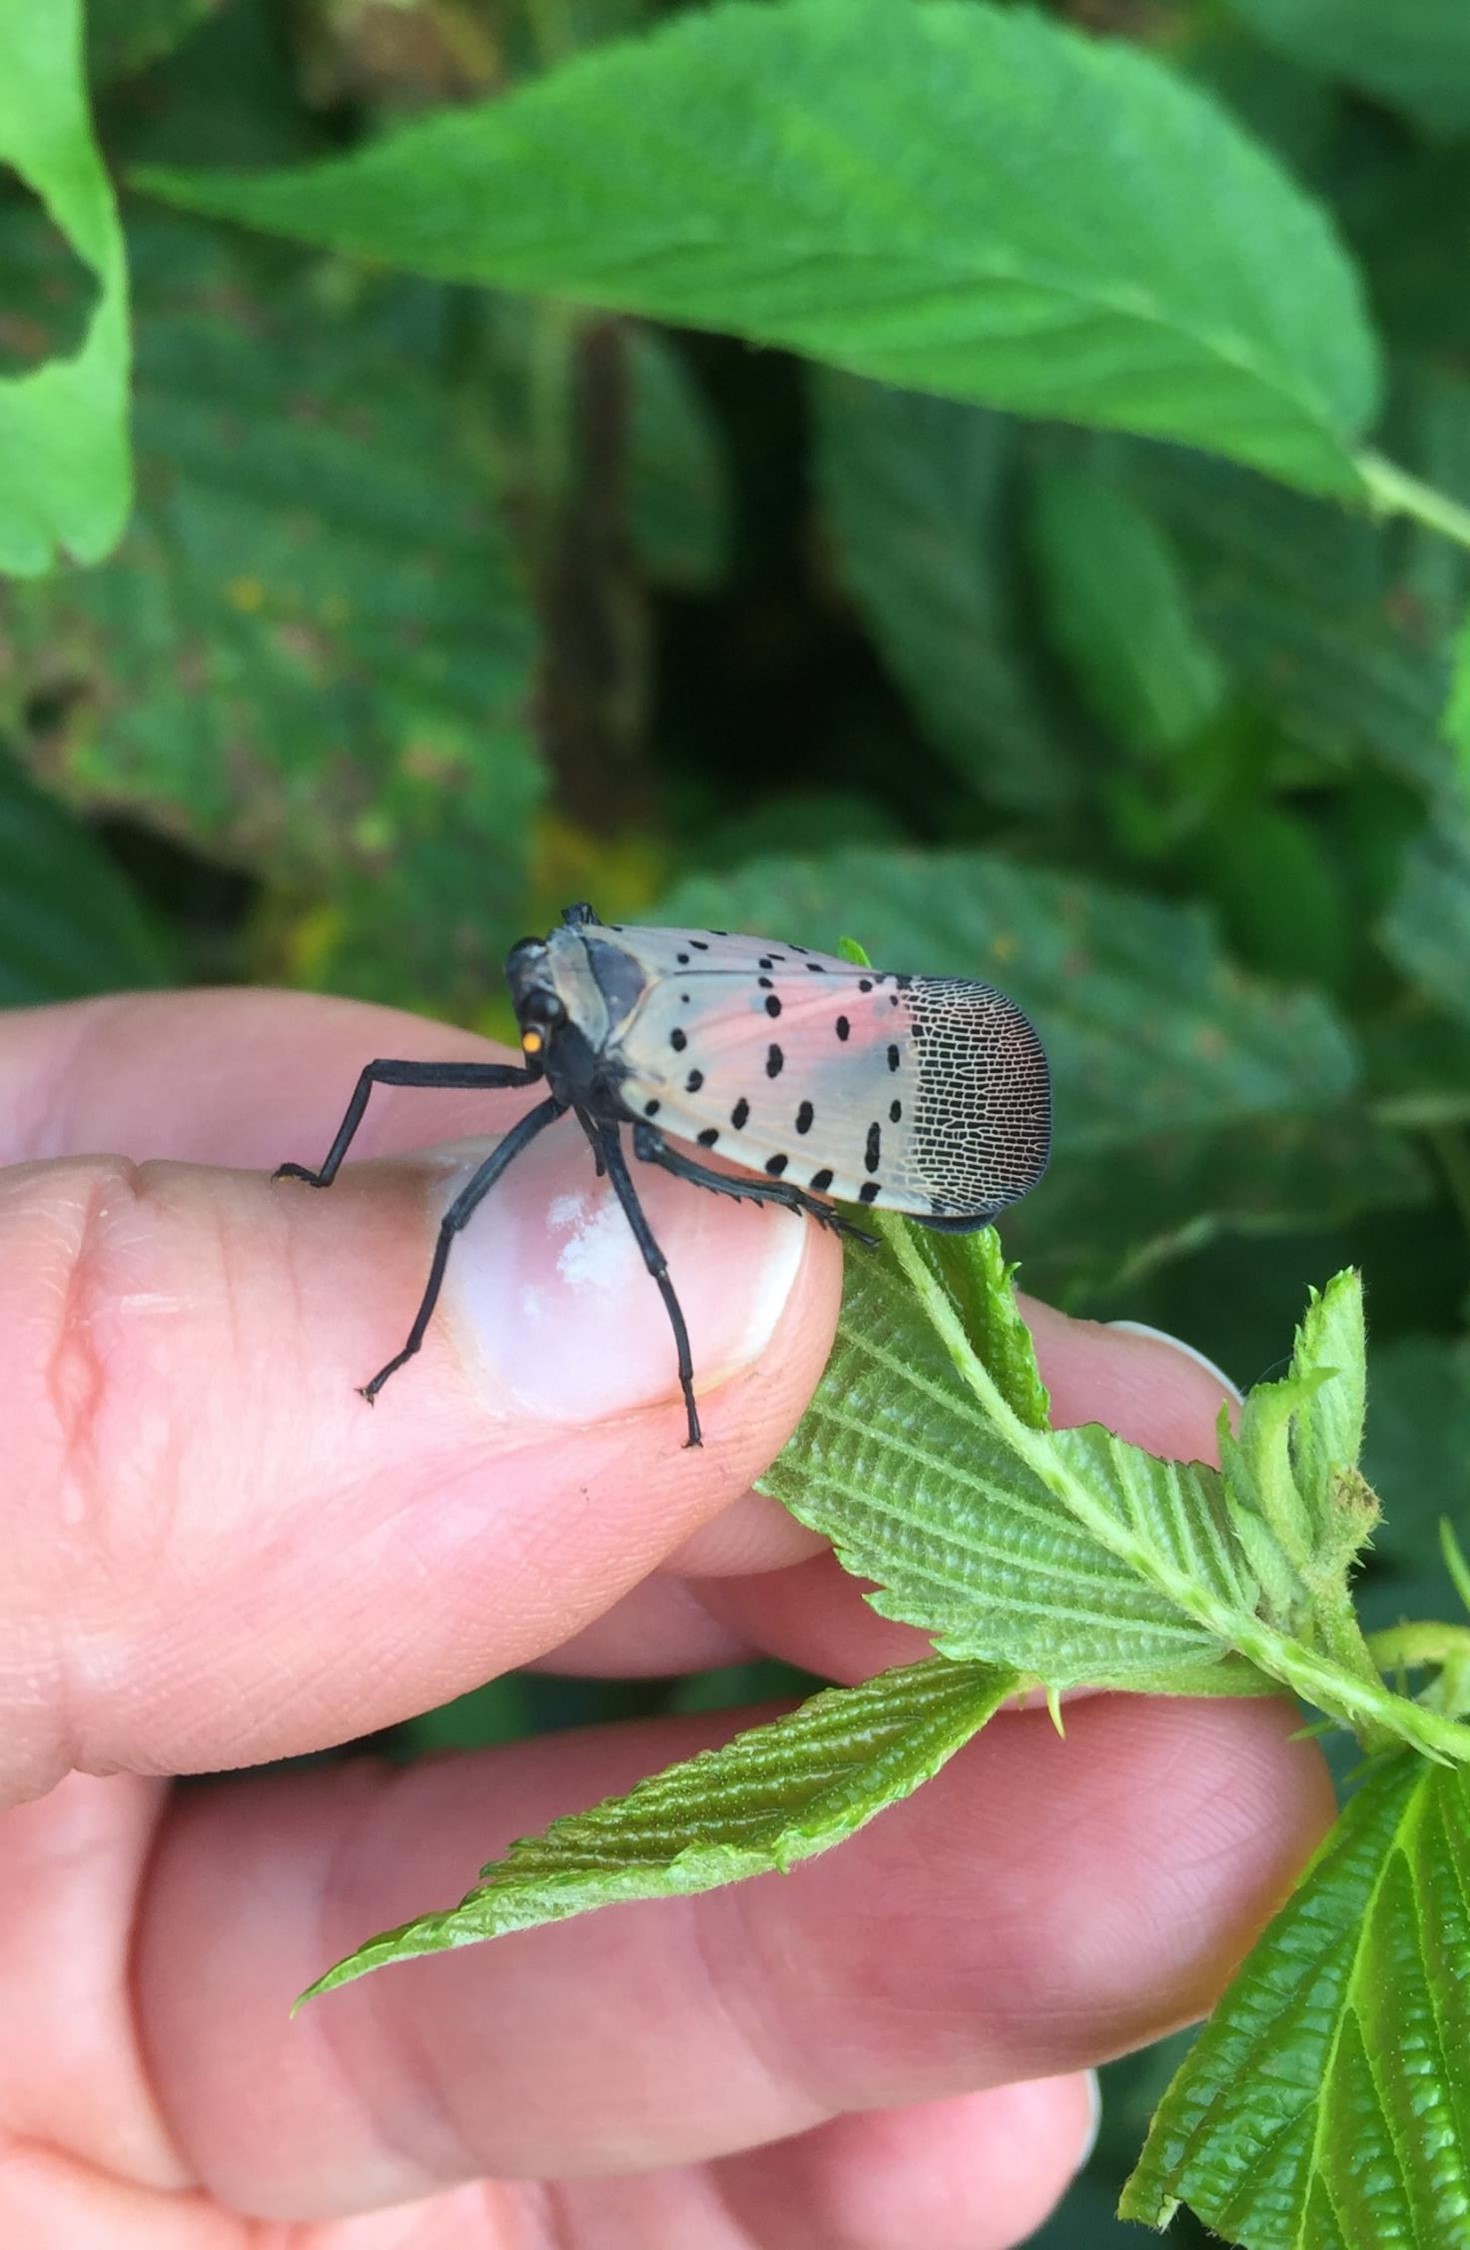 A spotted lanternfly adult on a person's thumb